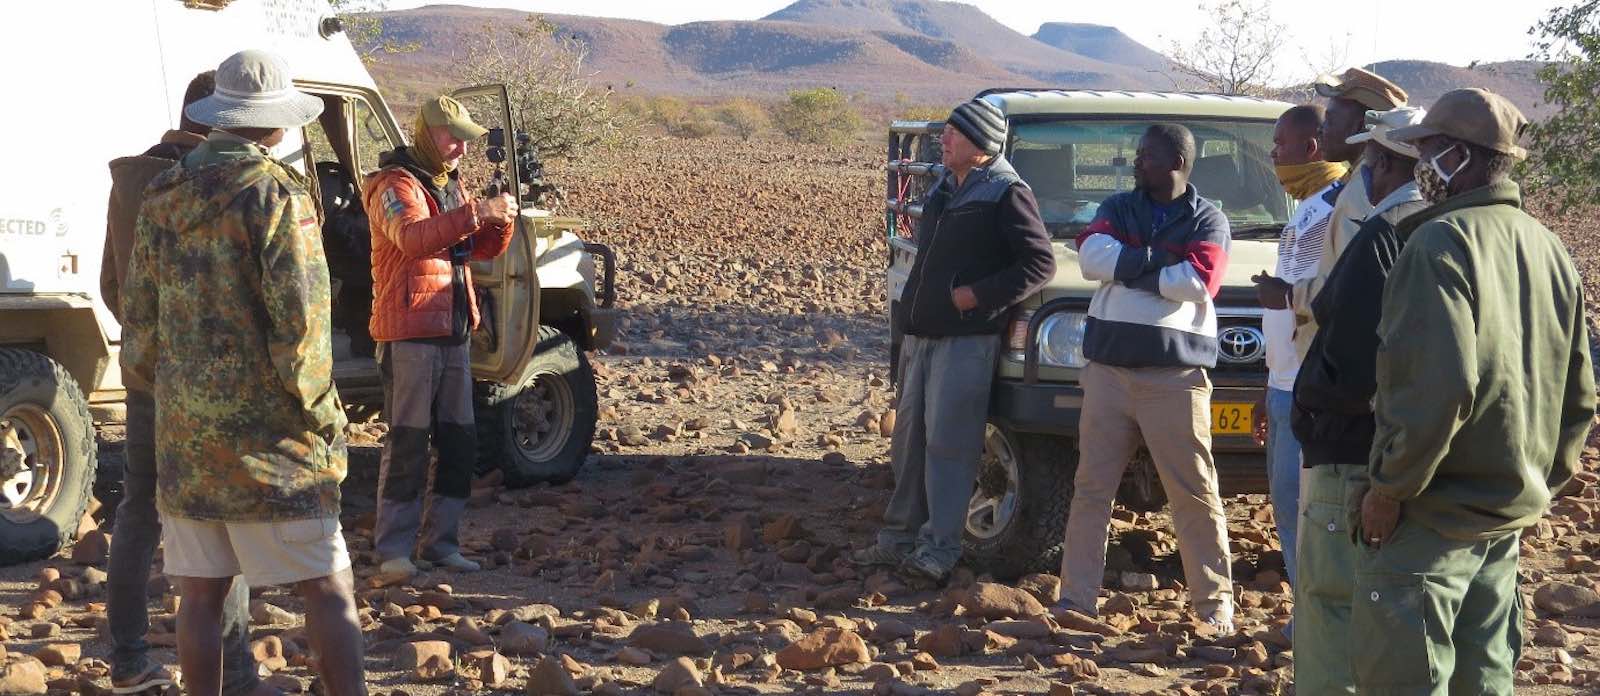 A group of people standing by two vehicles against a rocky and mountainous background.